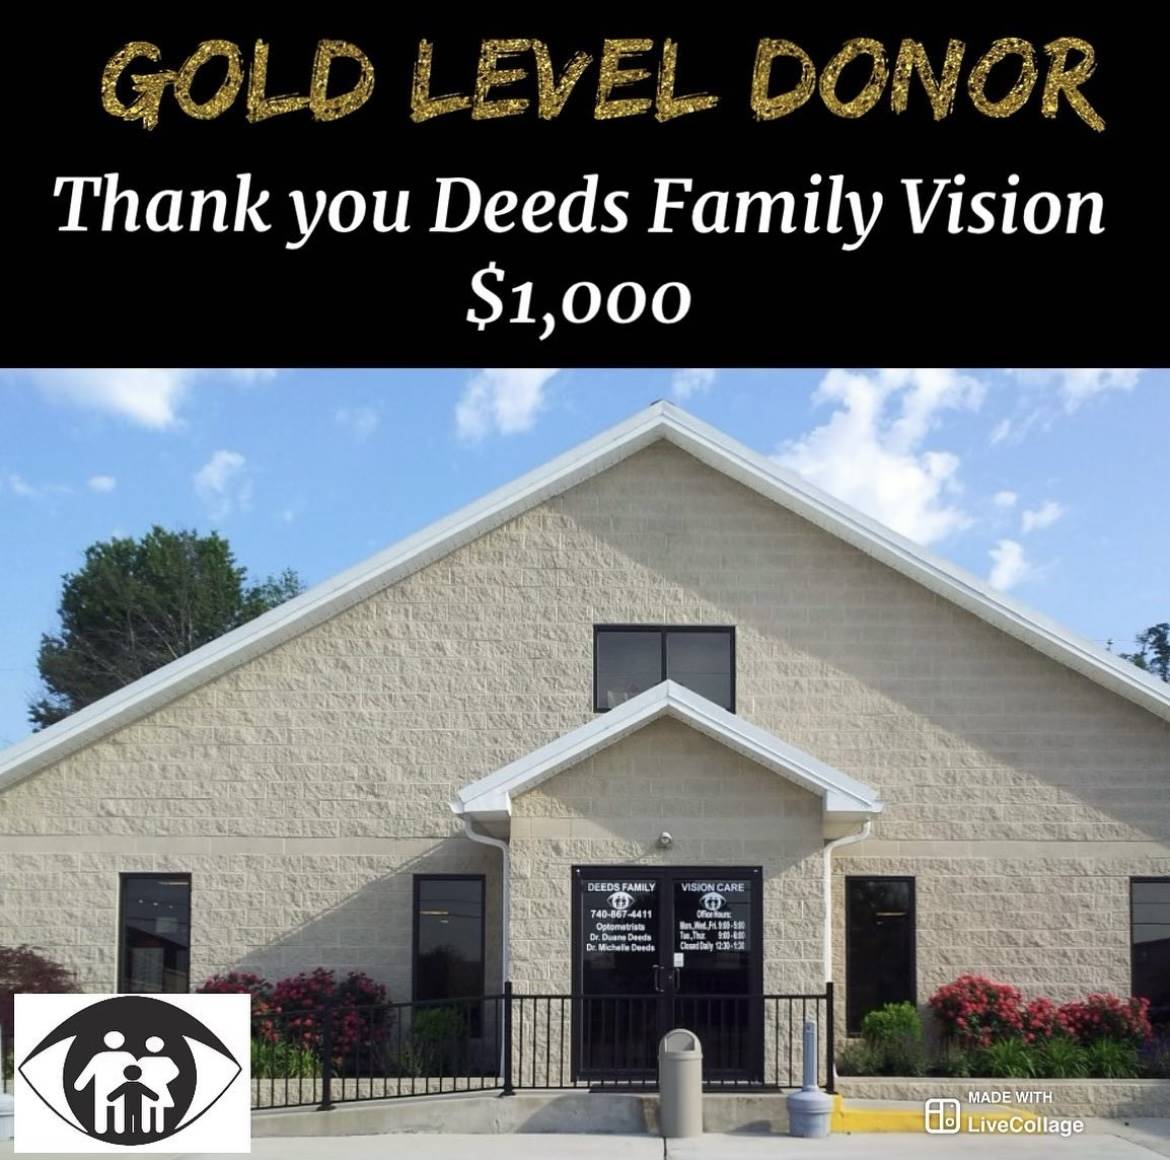 Deeds Family Vision